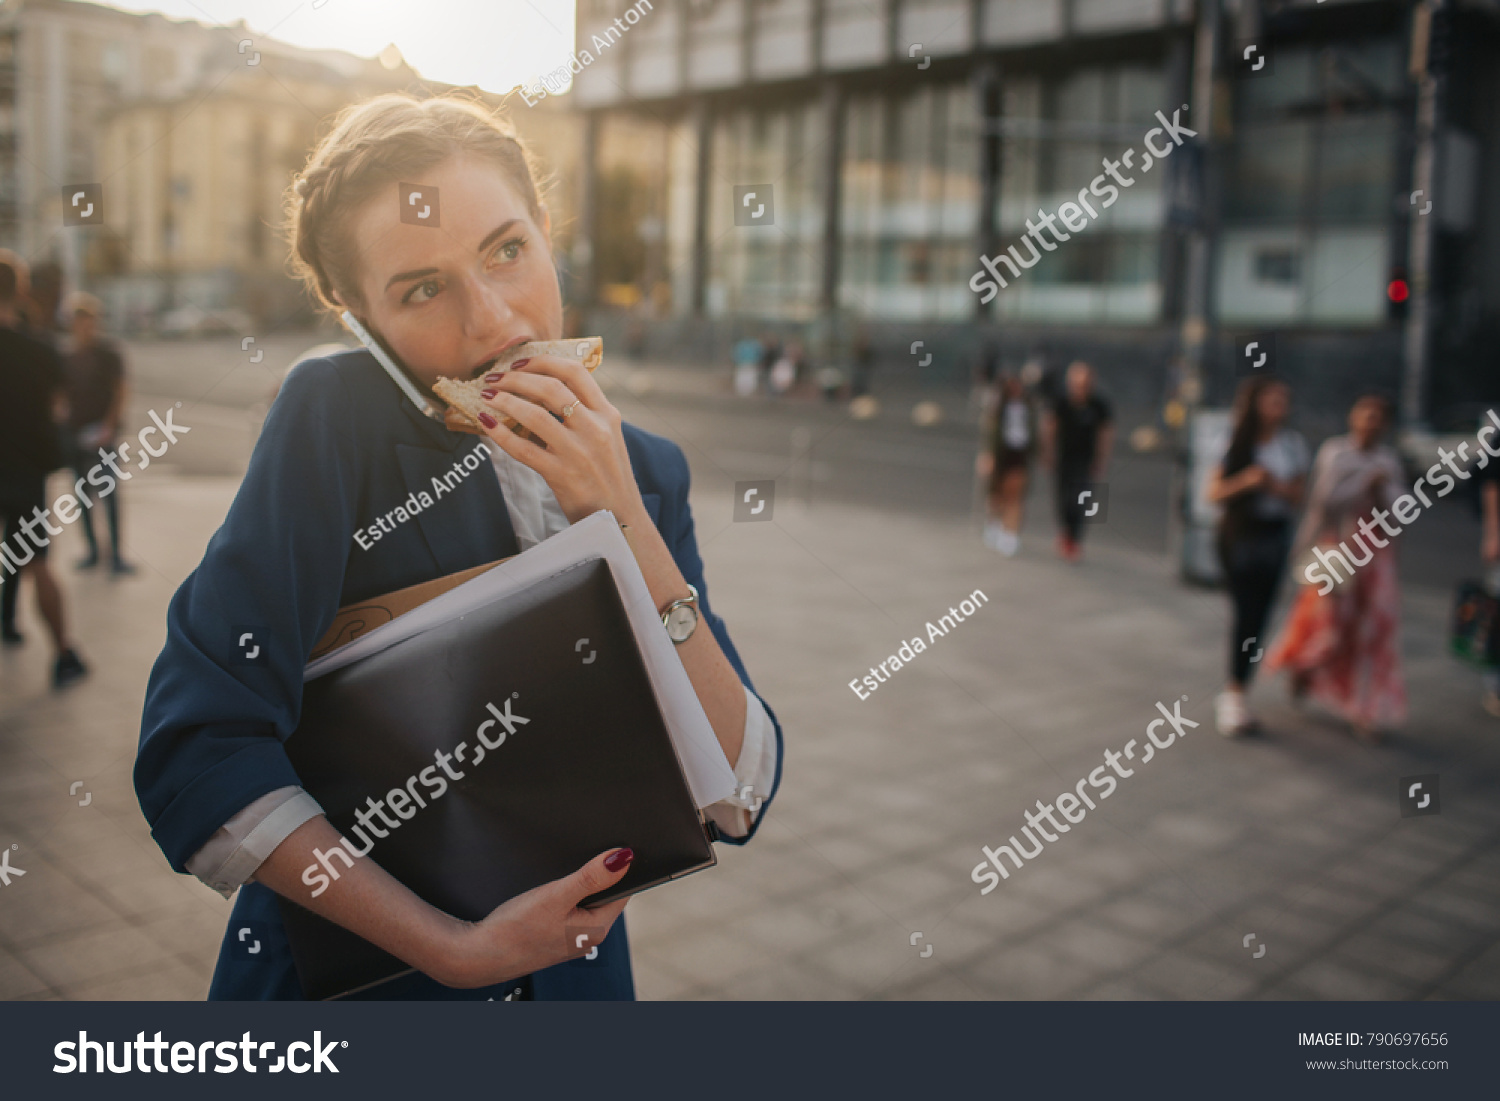 Busy woman is in a hurry, she does not have time, she is going to eat snack on the go. Worker eating, drinking coffee, talking on the phone, at the same time. Businesswoman doing multiple tasks #790697656